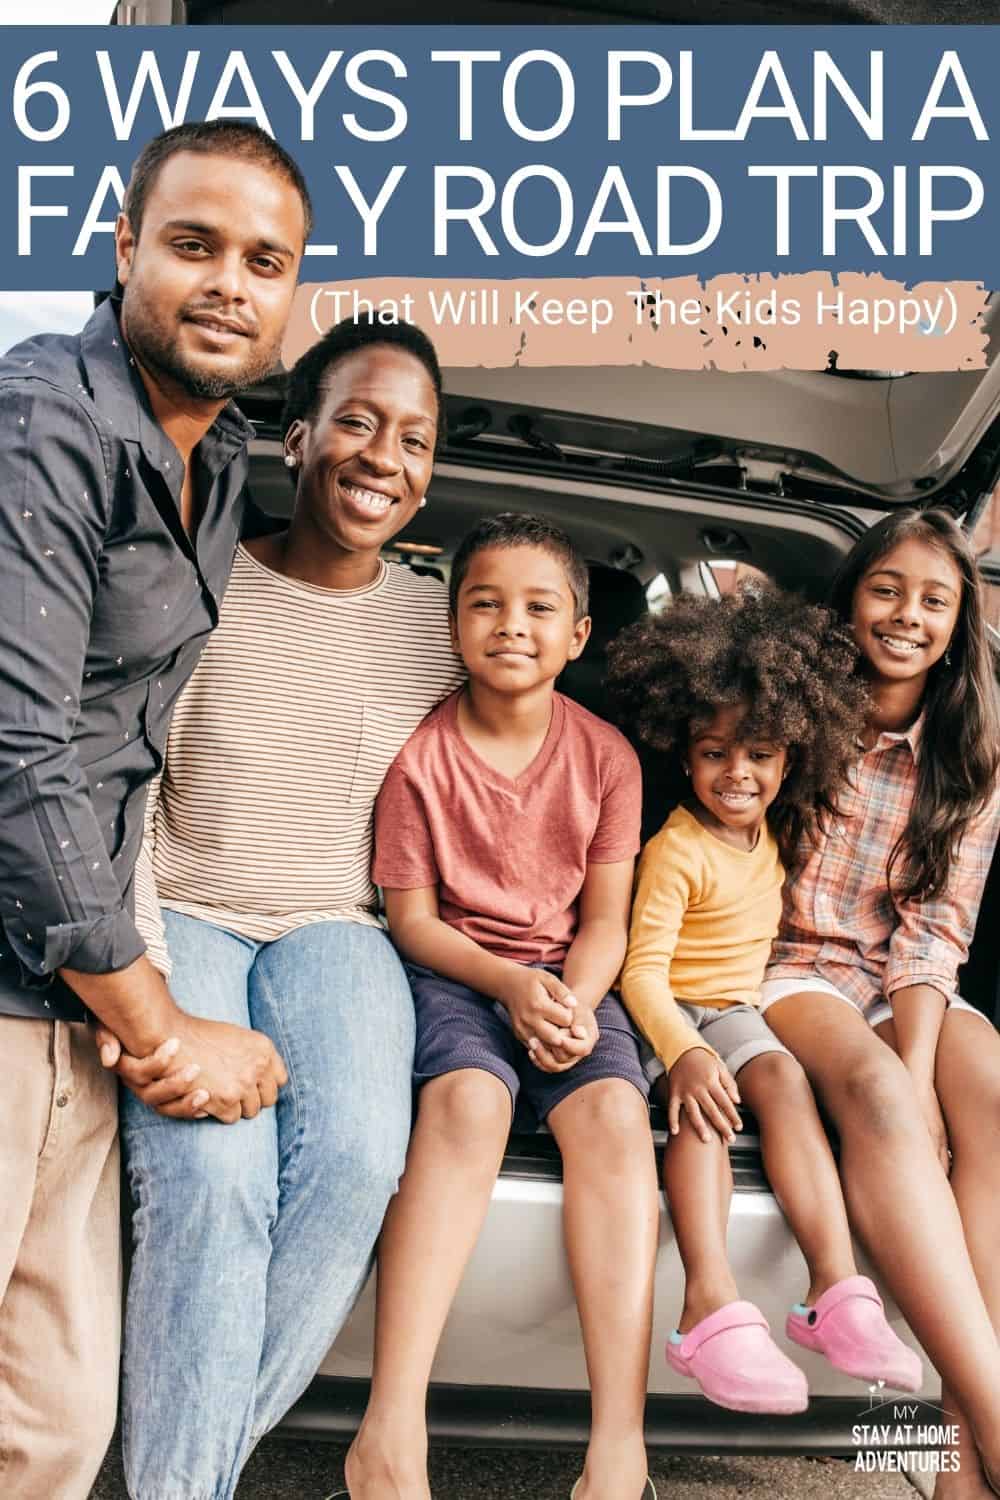 Planning a family road trip with kids? Learn six ways to plan the perfect family road trip that will keep everyone in your family happy! #familyroadtrip #roadtrips #tips #ideas via @mystayathome